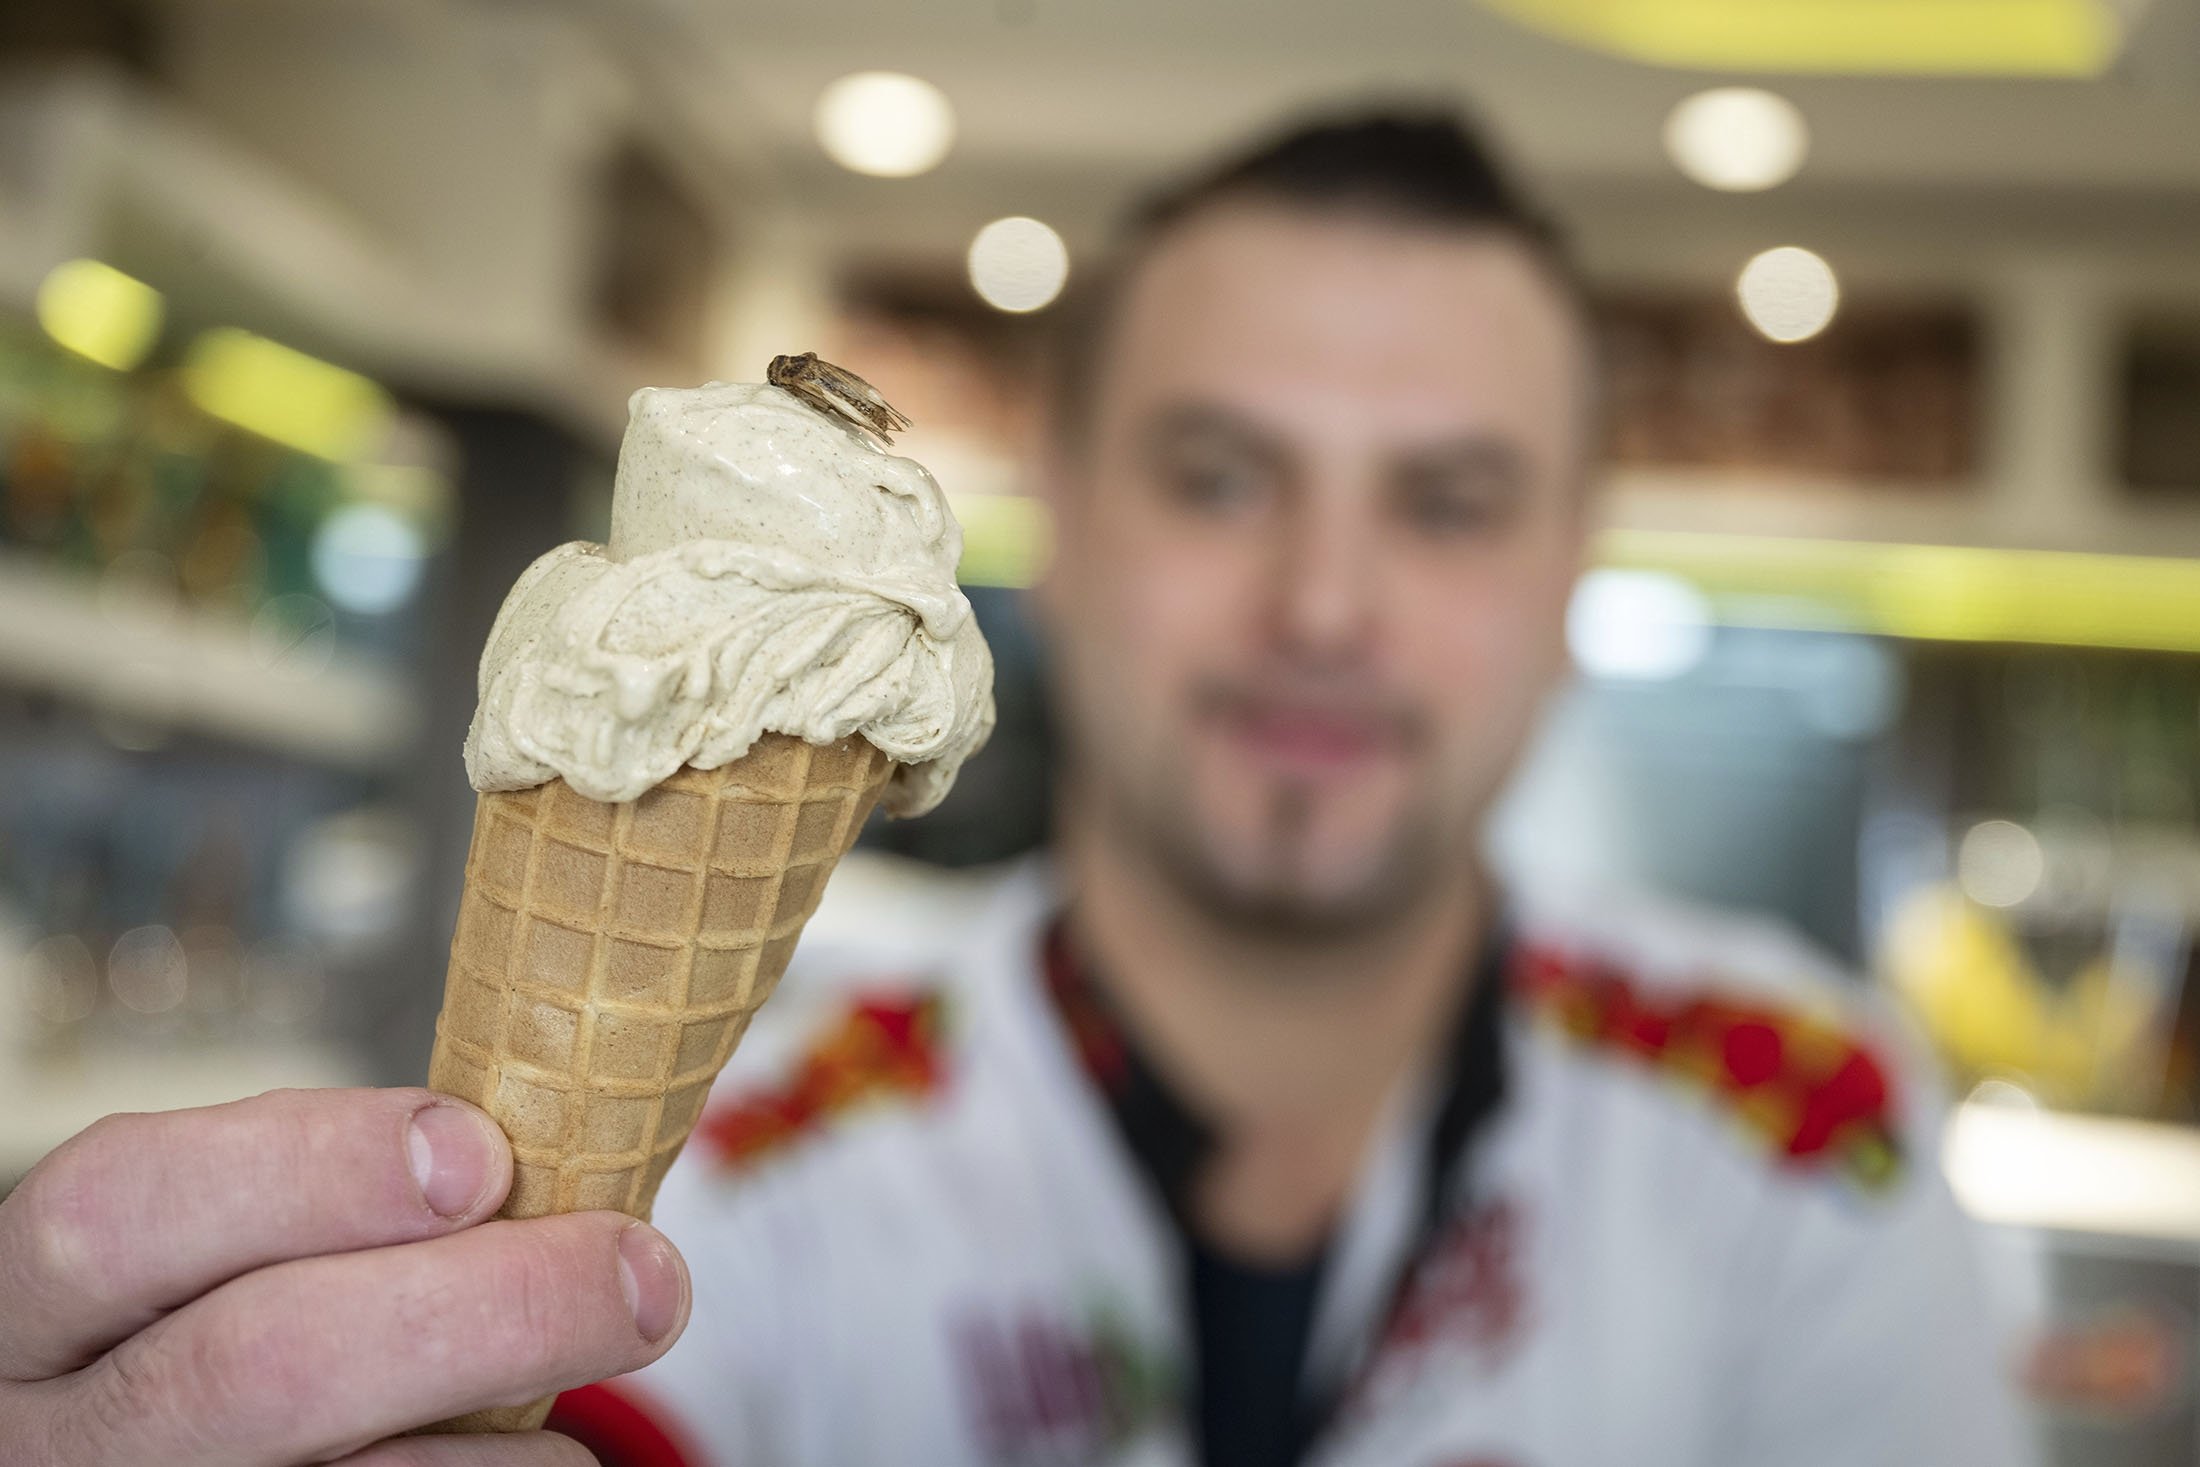 Thomas Micolino, owner of Eiscafe Rino, holds an ice cream cone in Rottenburg am Neckar, Germany, March 1, 2023. (AP Photo)